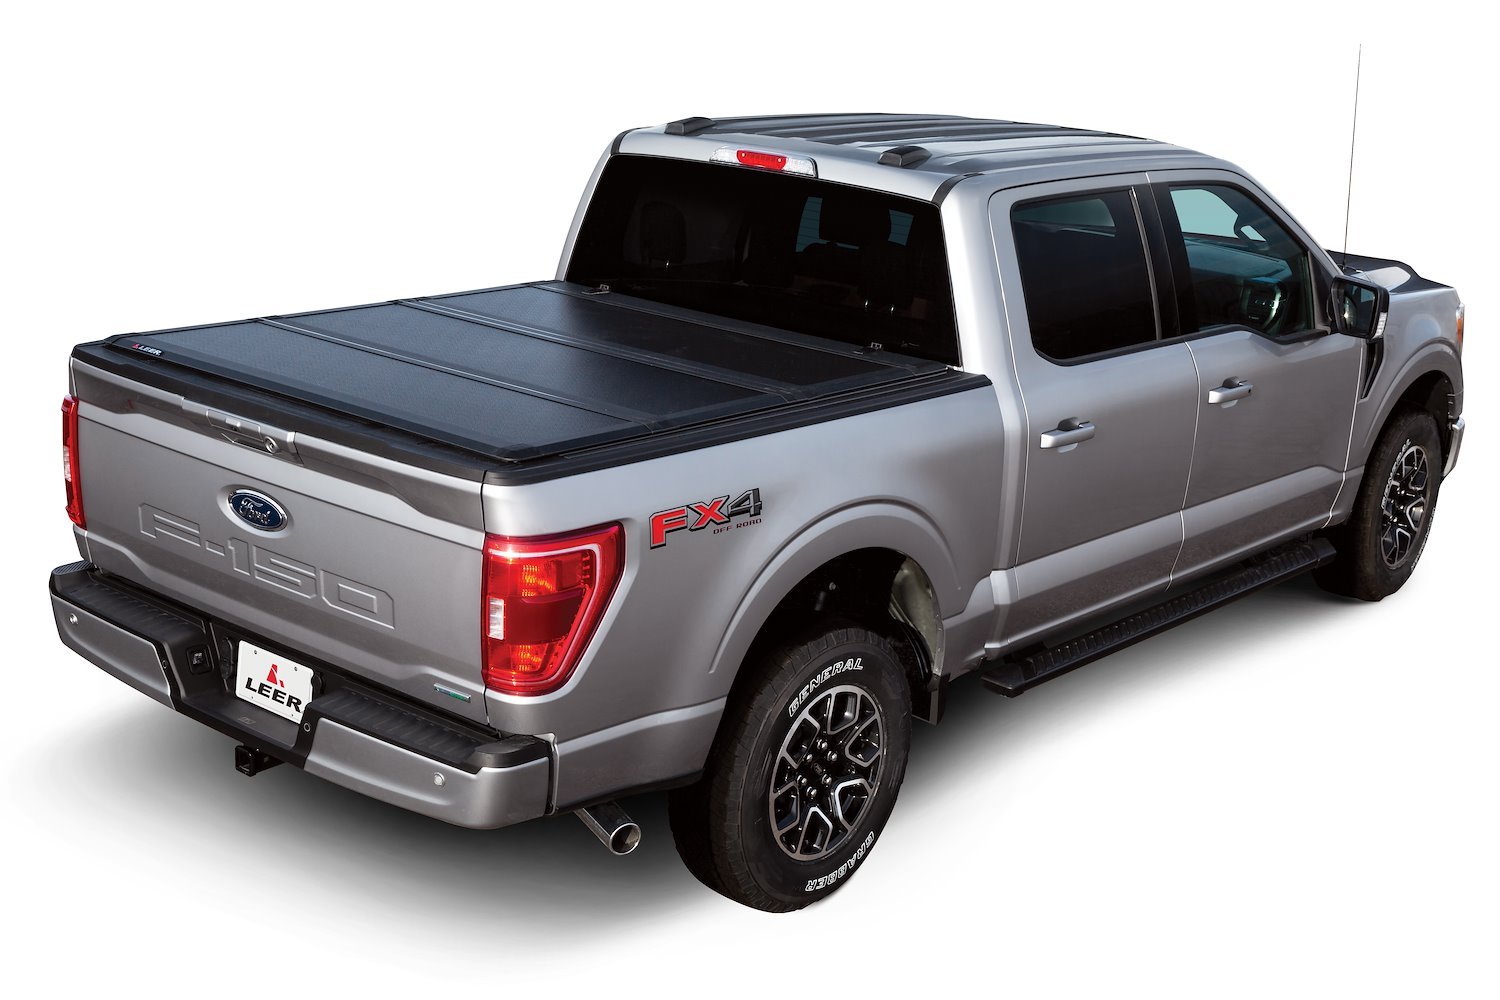 HF350M Hard Tri-Folding Tonneau Cover Fits Select Ram 1500 [Bed Length: 6 ft. 4 in.]